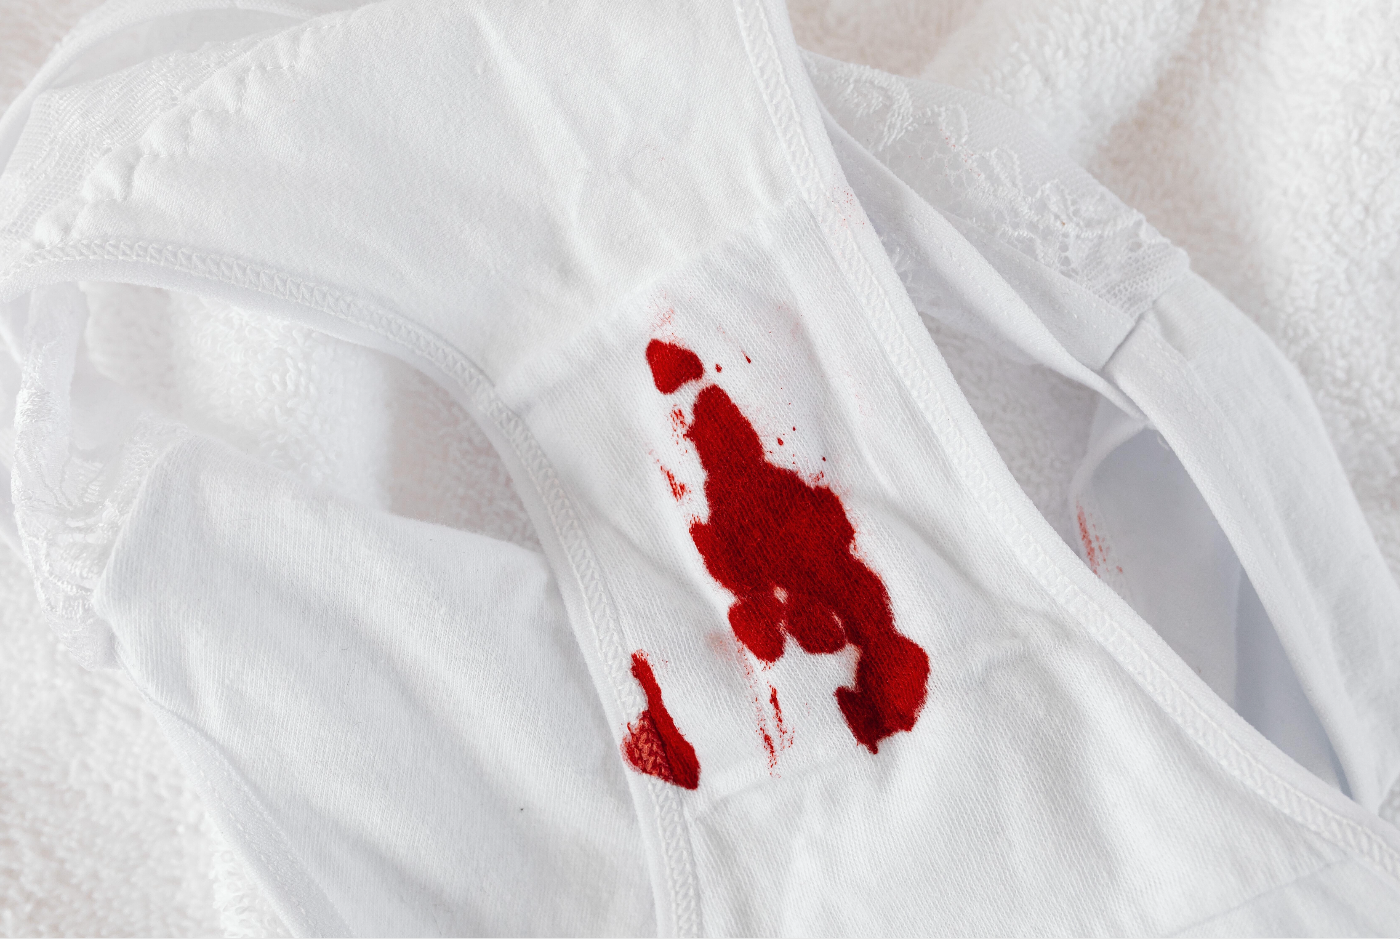 Blood Clots in Periods - How to treat them?